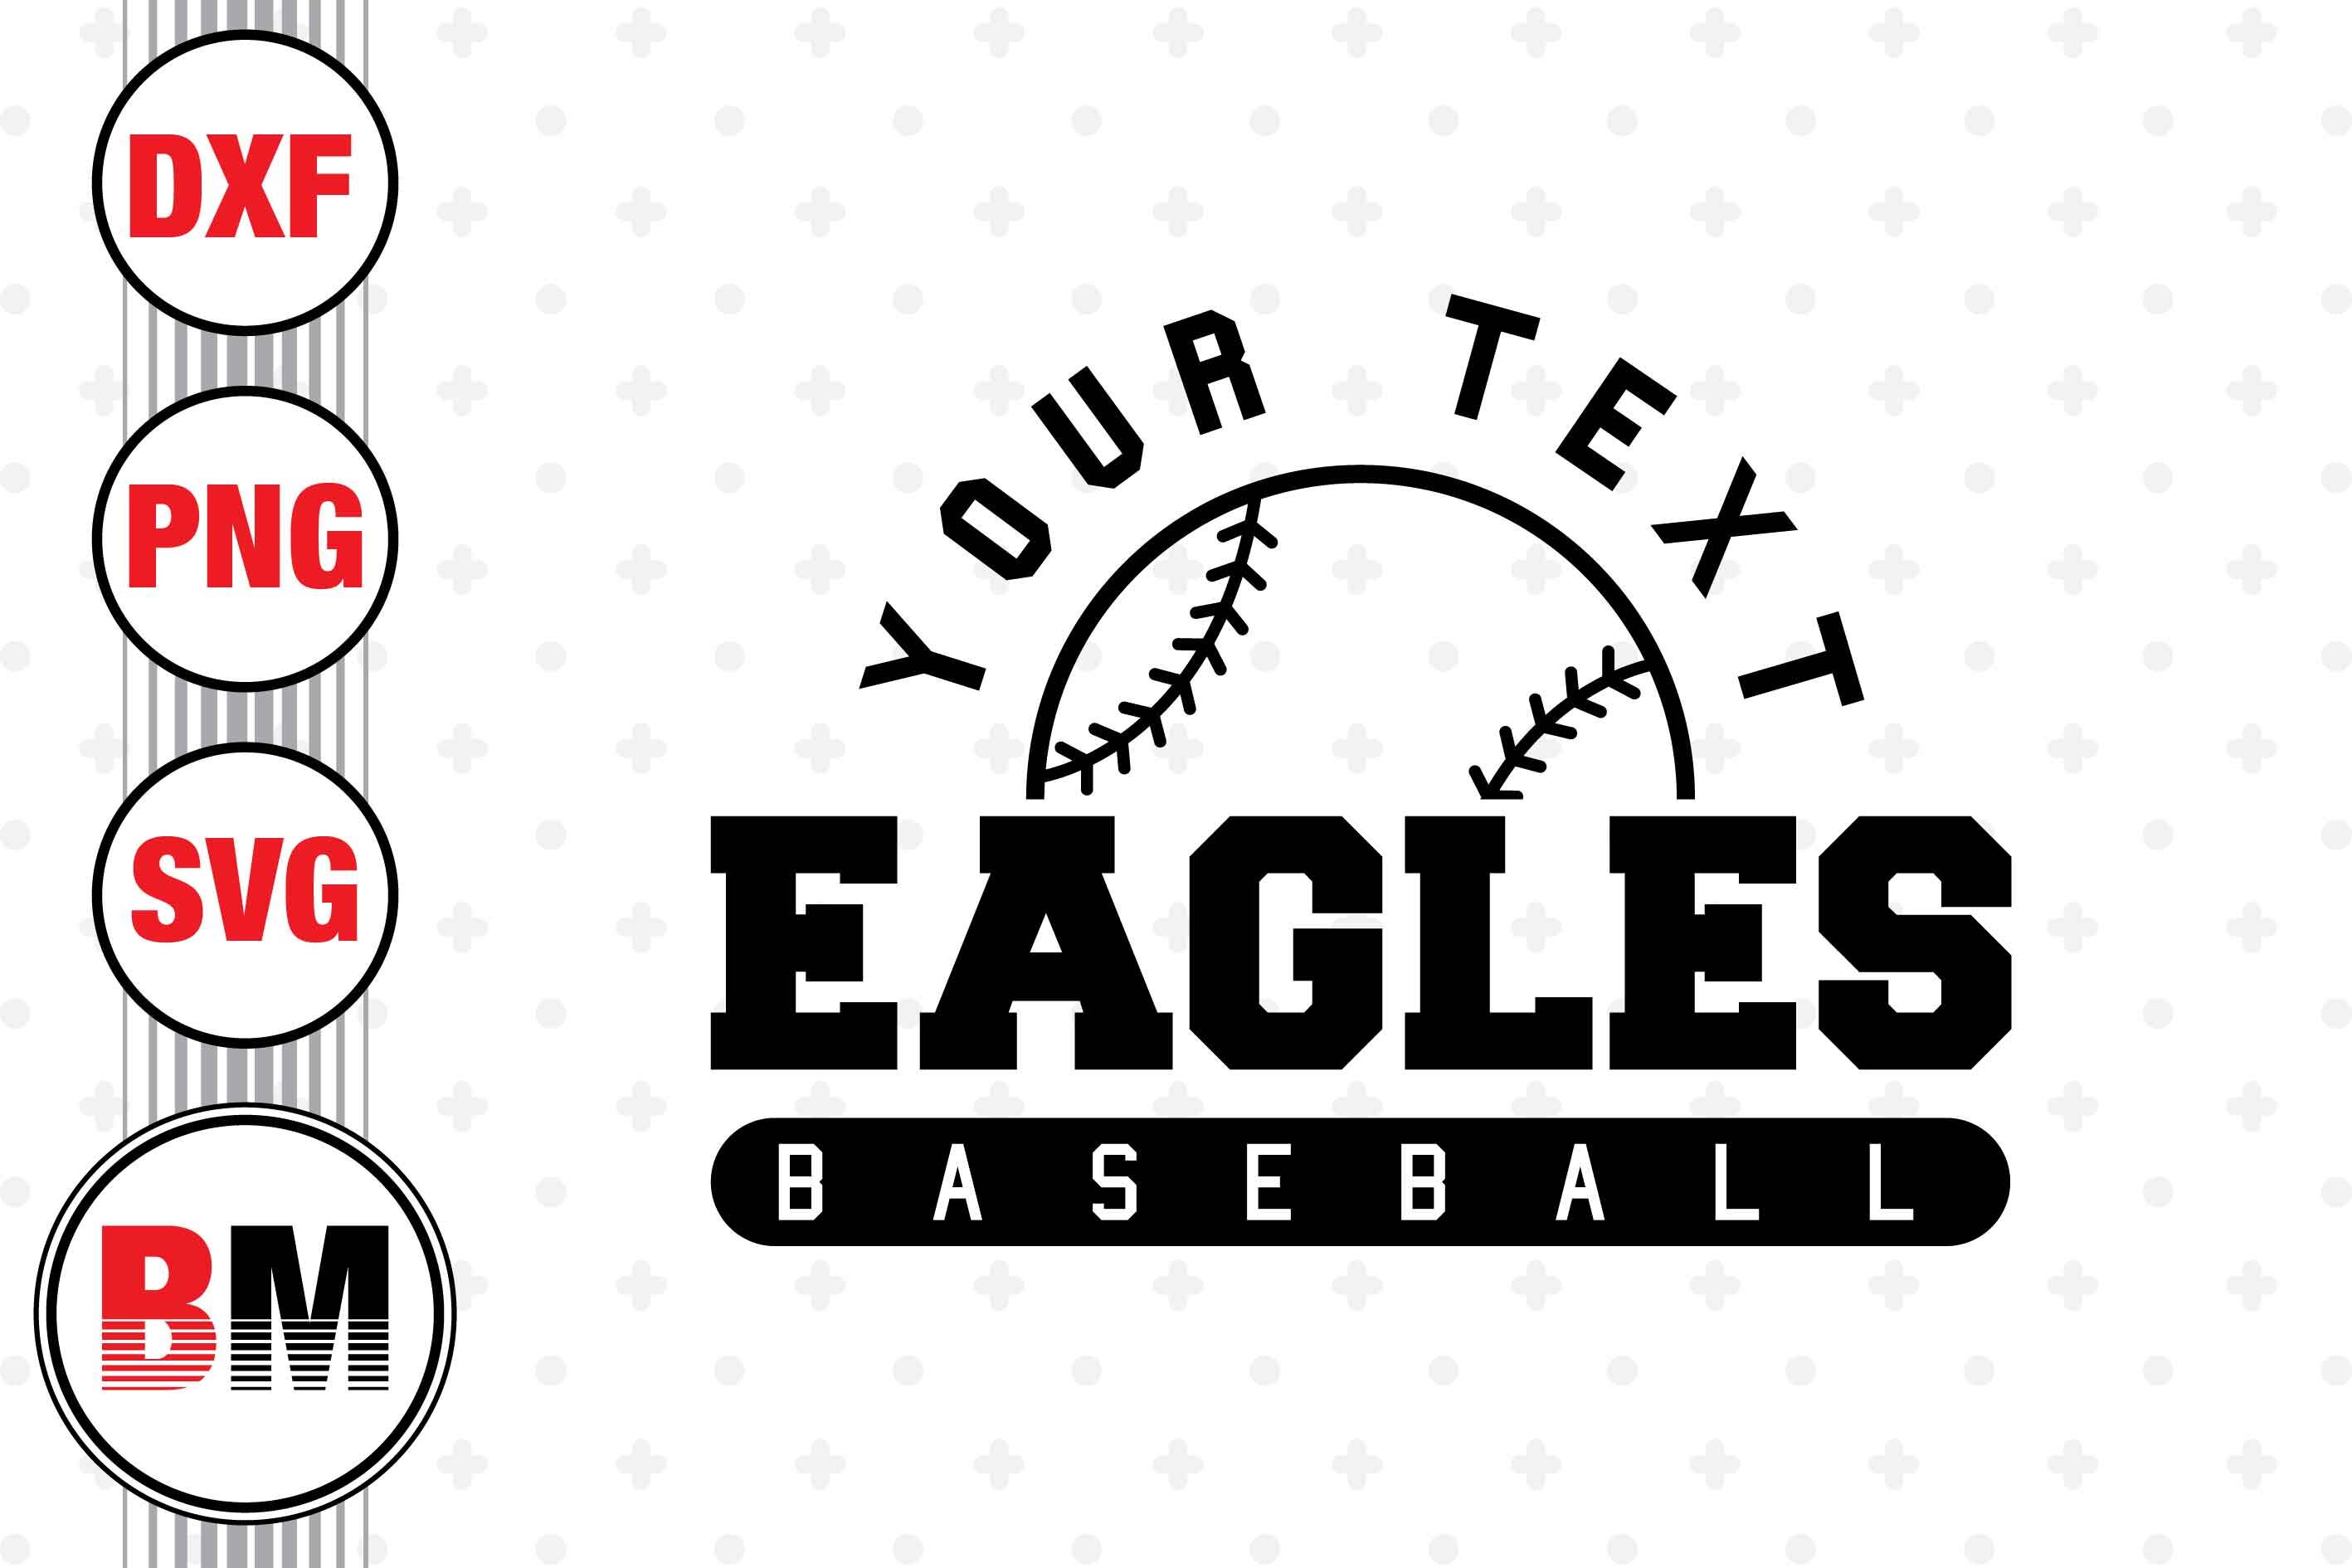 Eagles Baseball SVG, PNG, DXF Files By Bmdesign | TheHungryJPEG